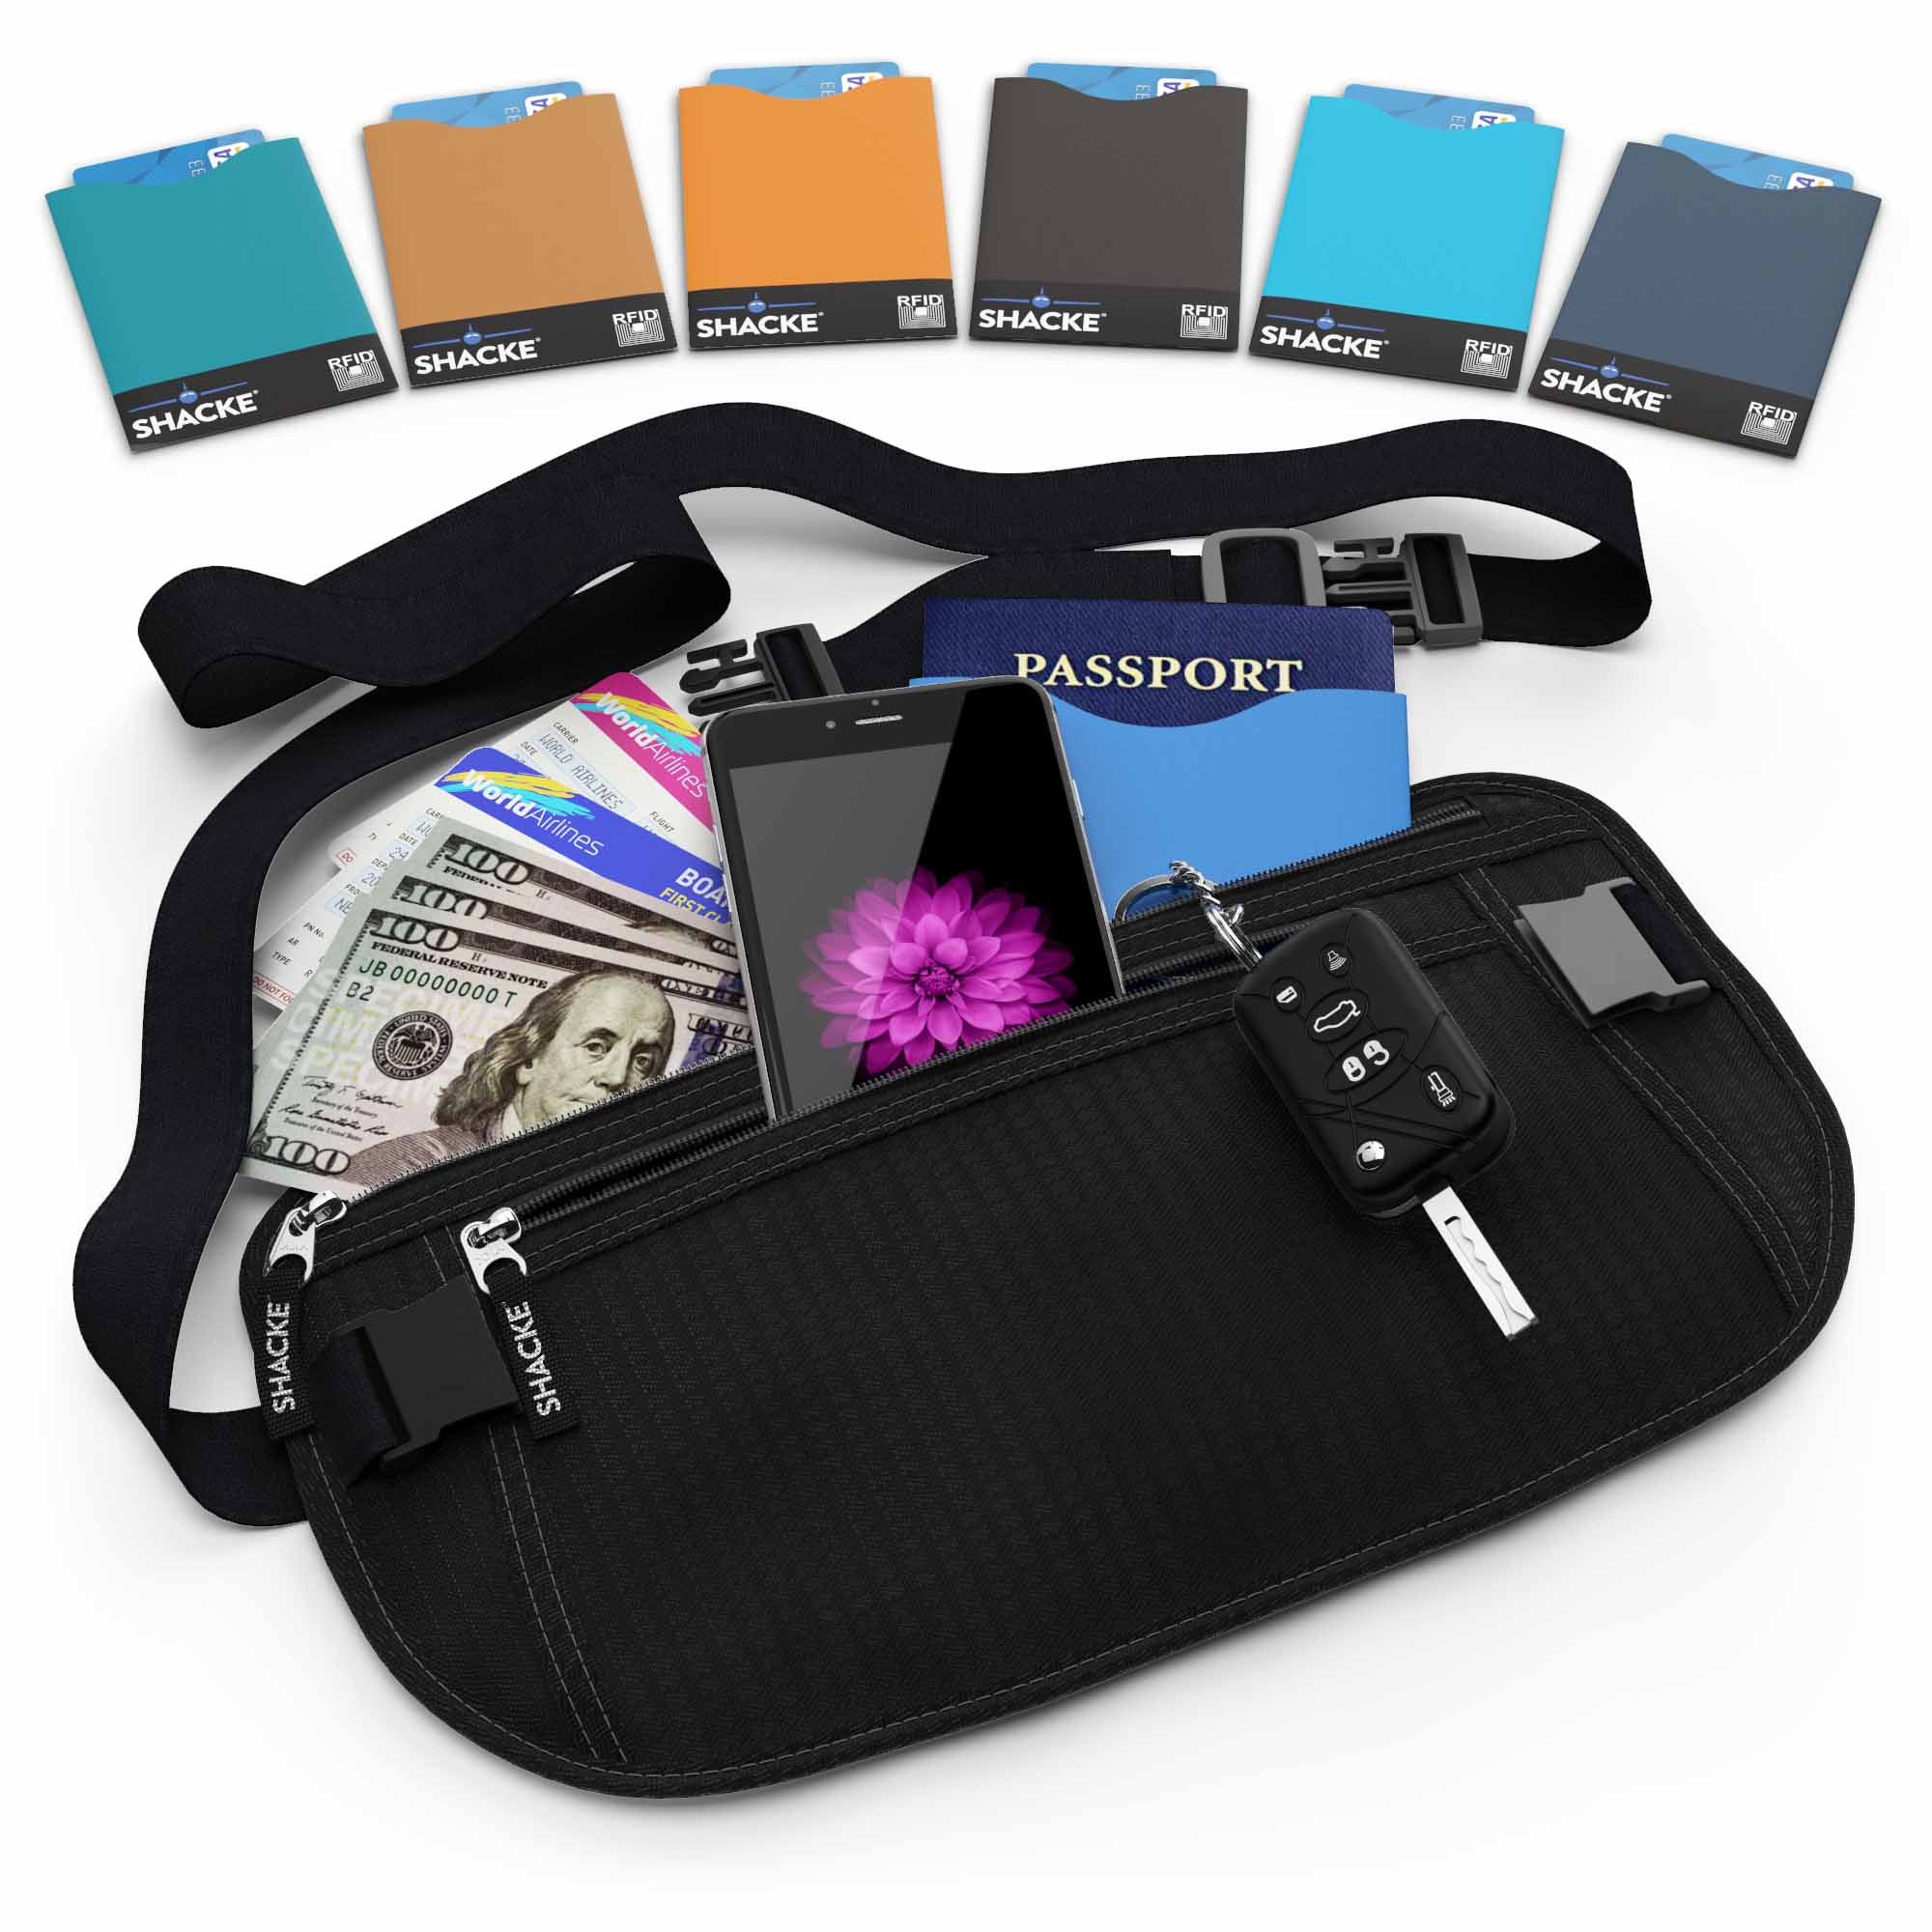 2 Pack Money Belt For Travel With RFID Blocking and Earphone Hole